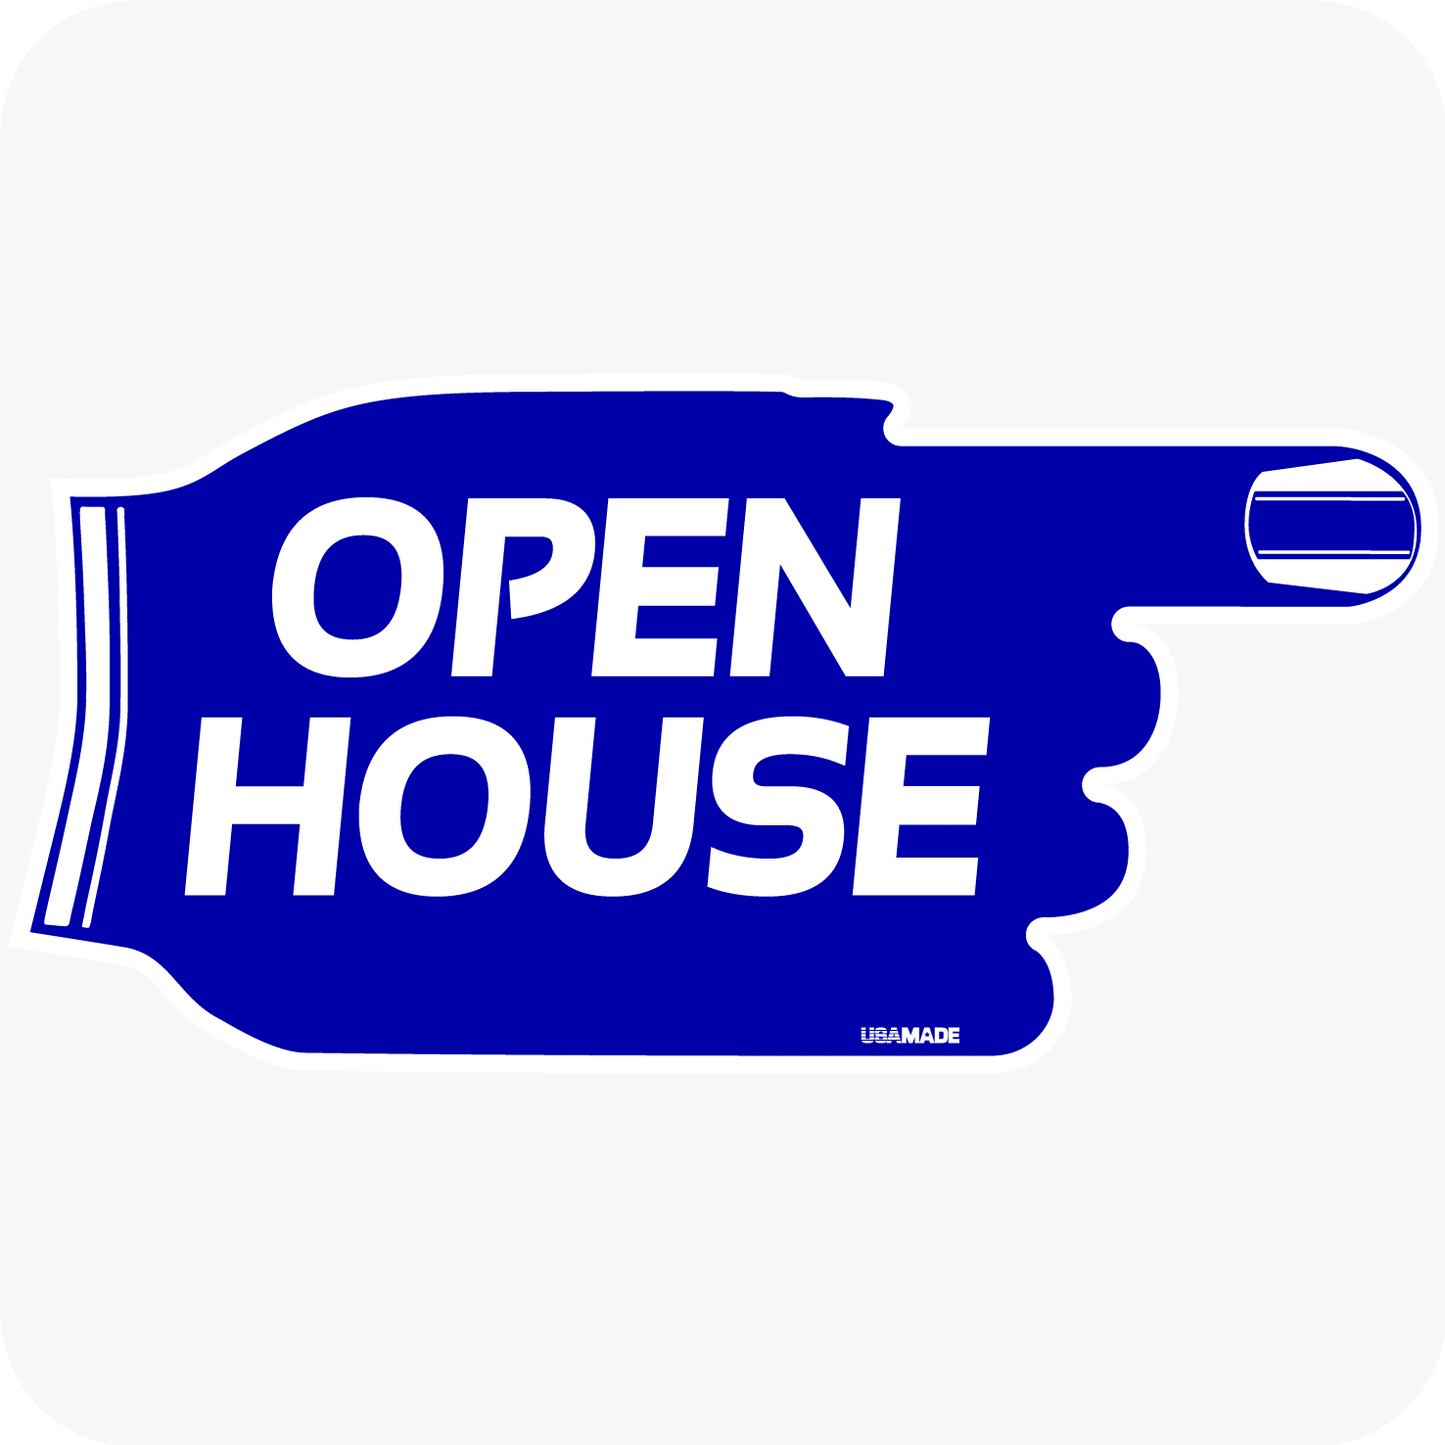 Open House Corrugated Hand Sign 24 x 12 - Blue